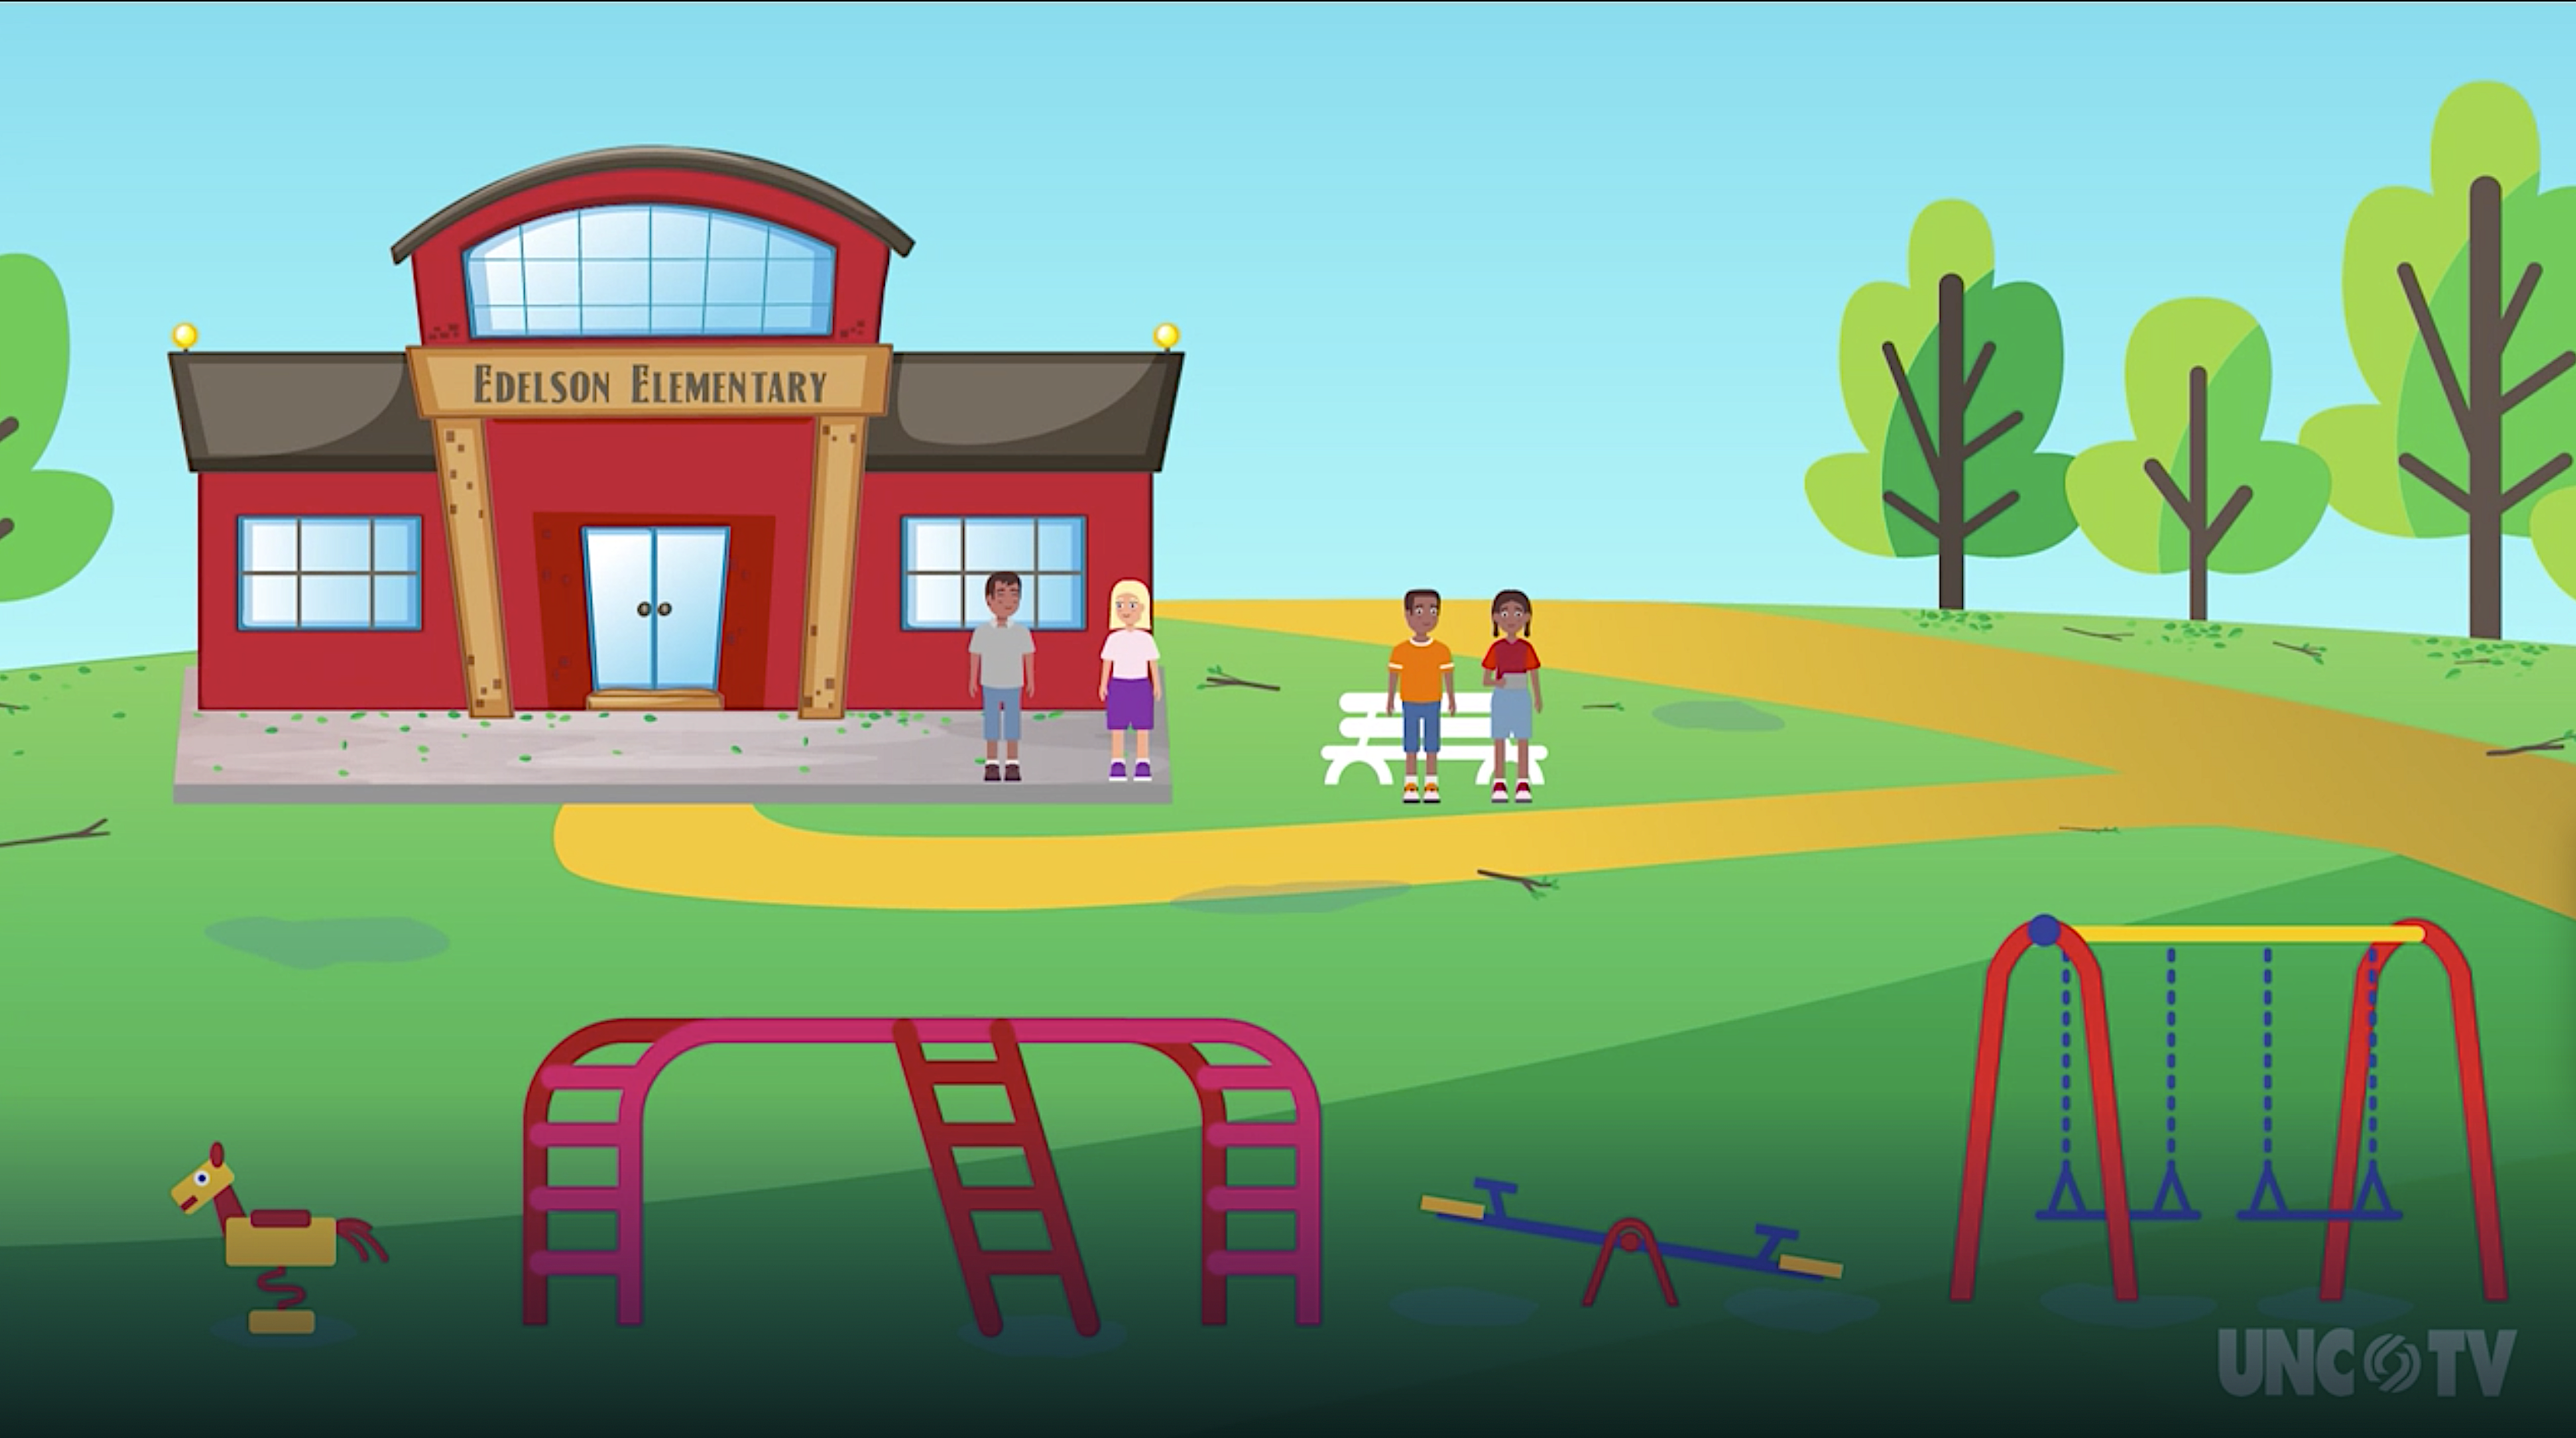 The Watershed Wisdom Lesson Plan includes “River Avengers,” an animated video.